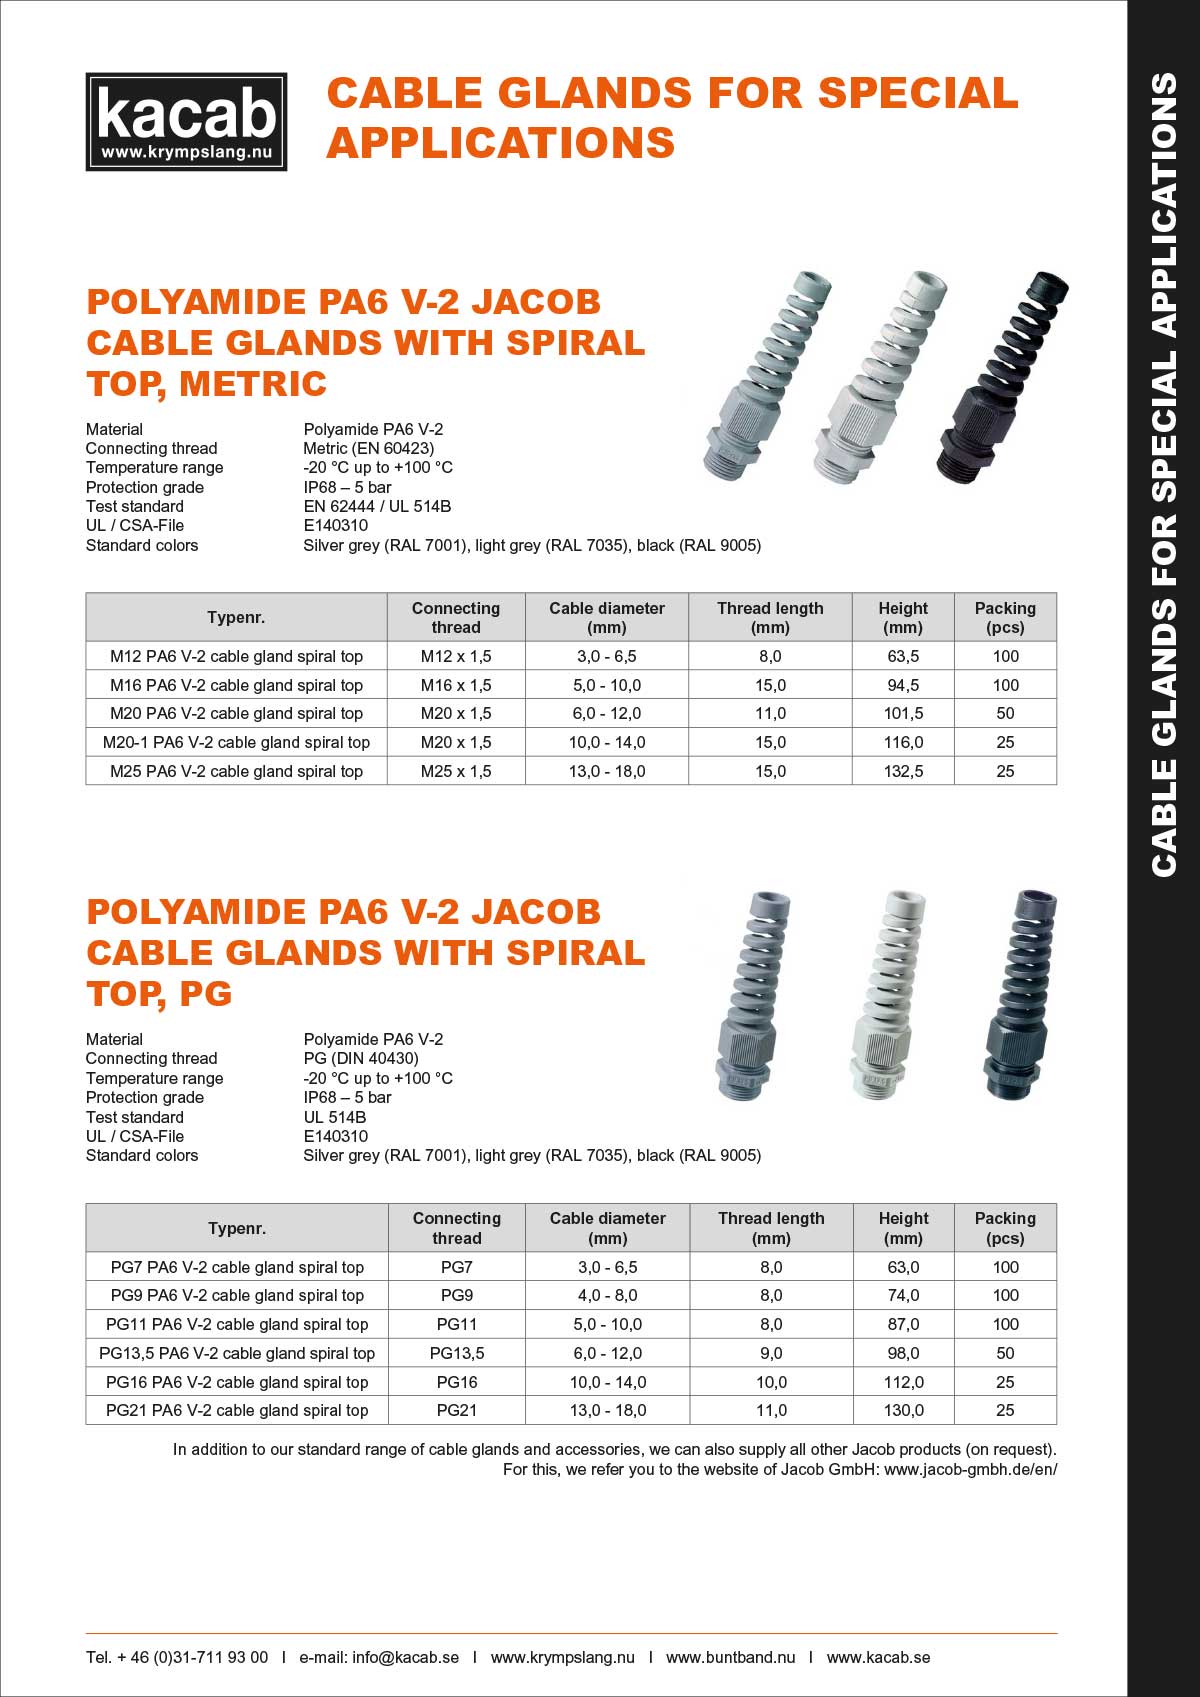 Polyamide PA6 V-2 Jacob cable glands with spiral top-PG